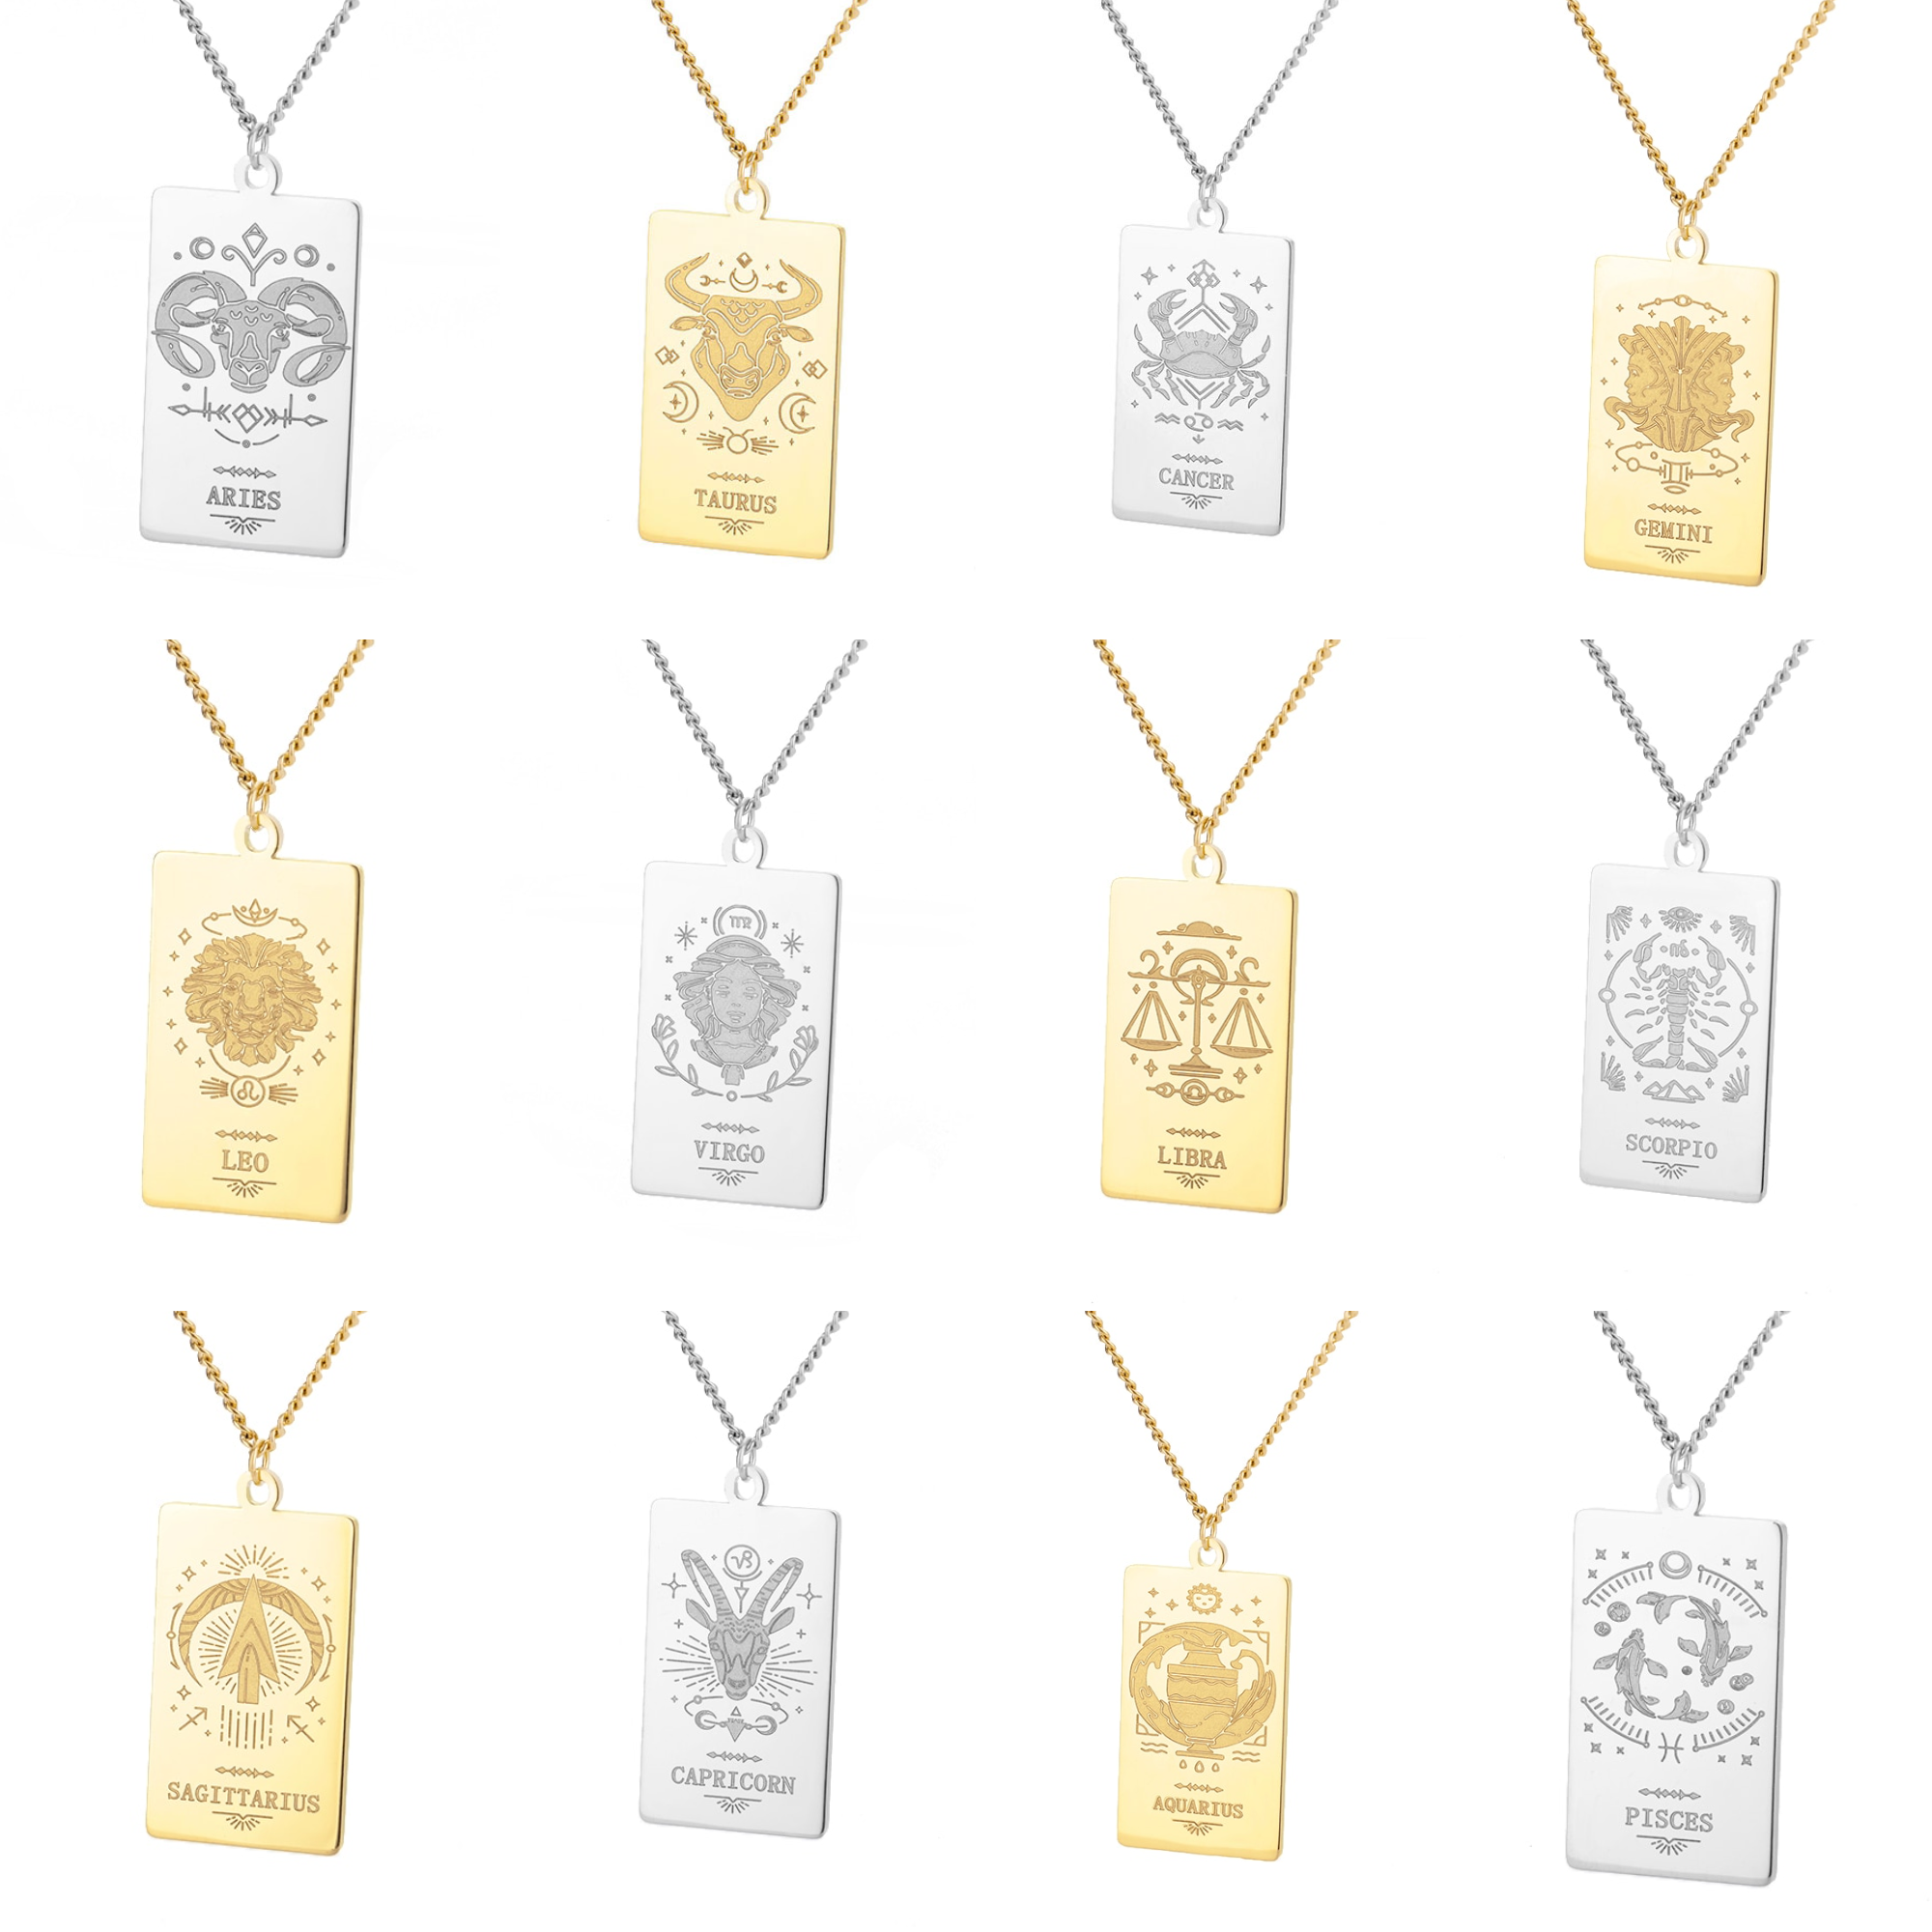 Zodiac Sign Necklace | Astrology Symbols Of The 12 Constellations In Silver Or Gold-Plated Pendants